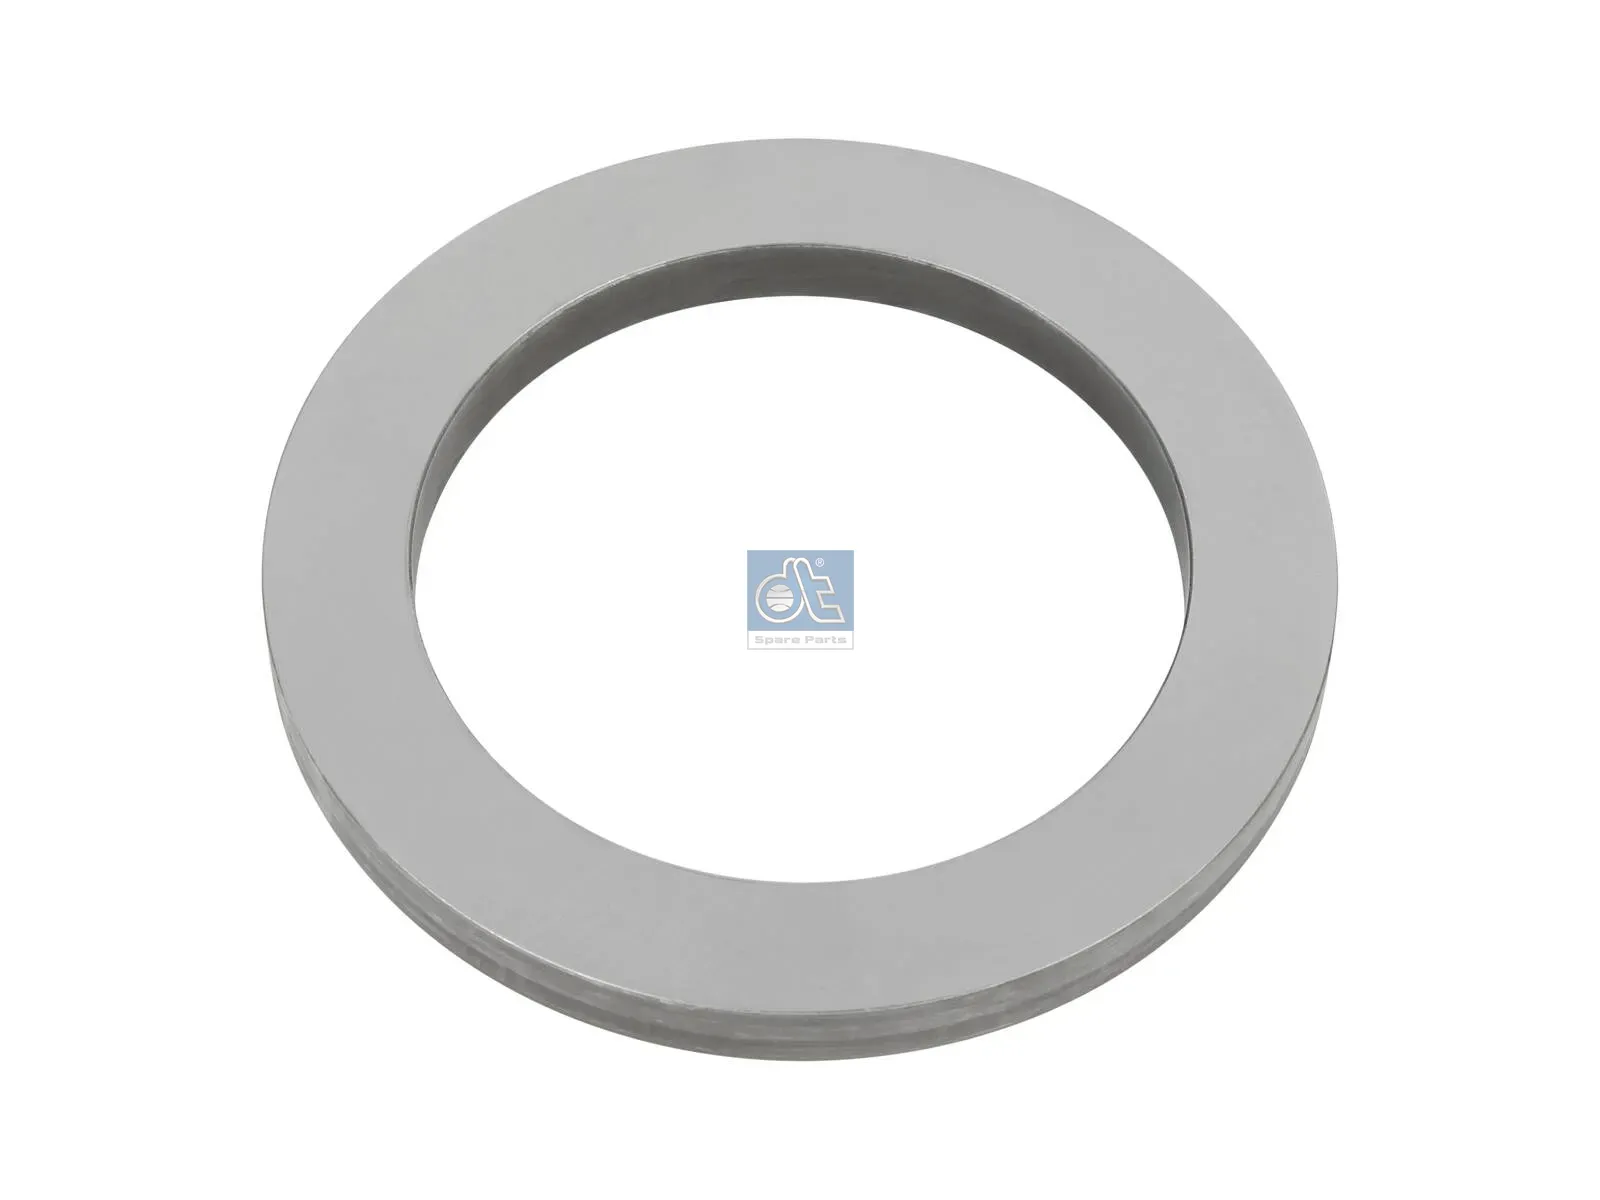 Spacer washer